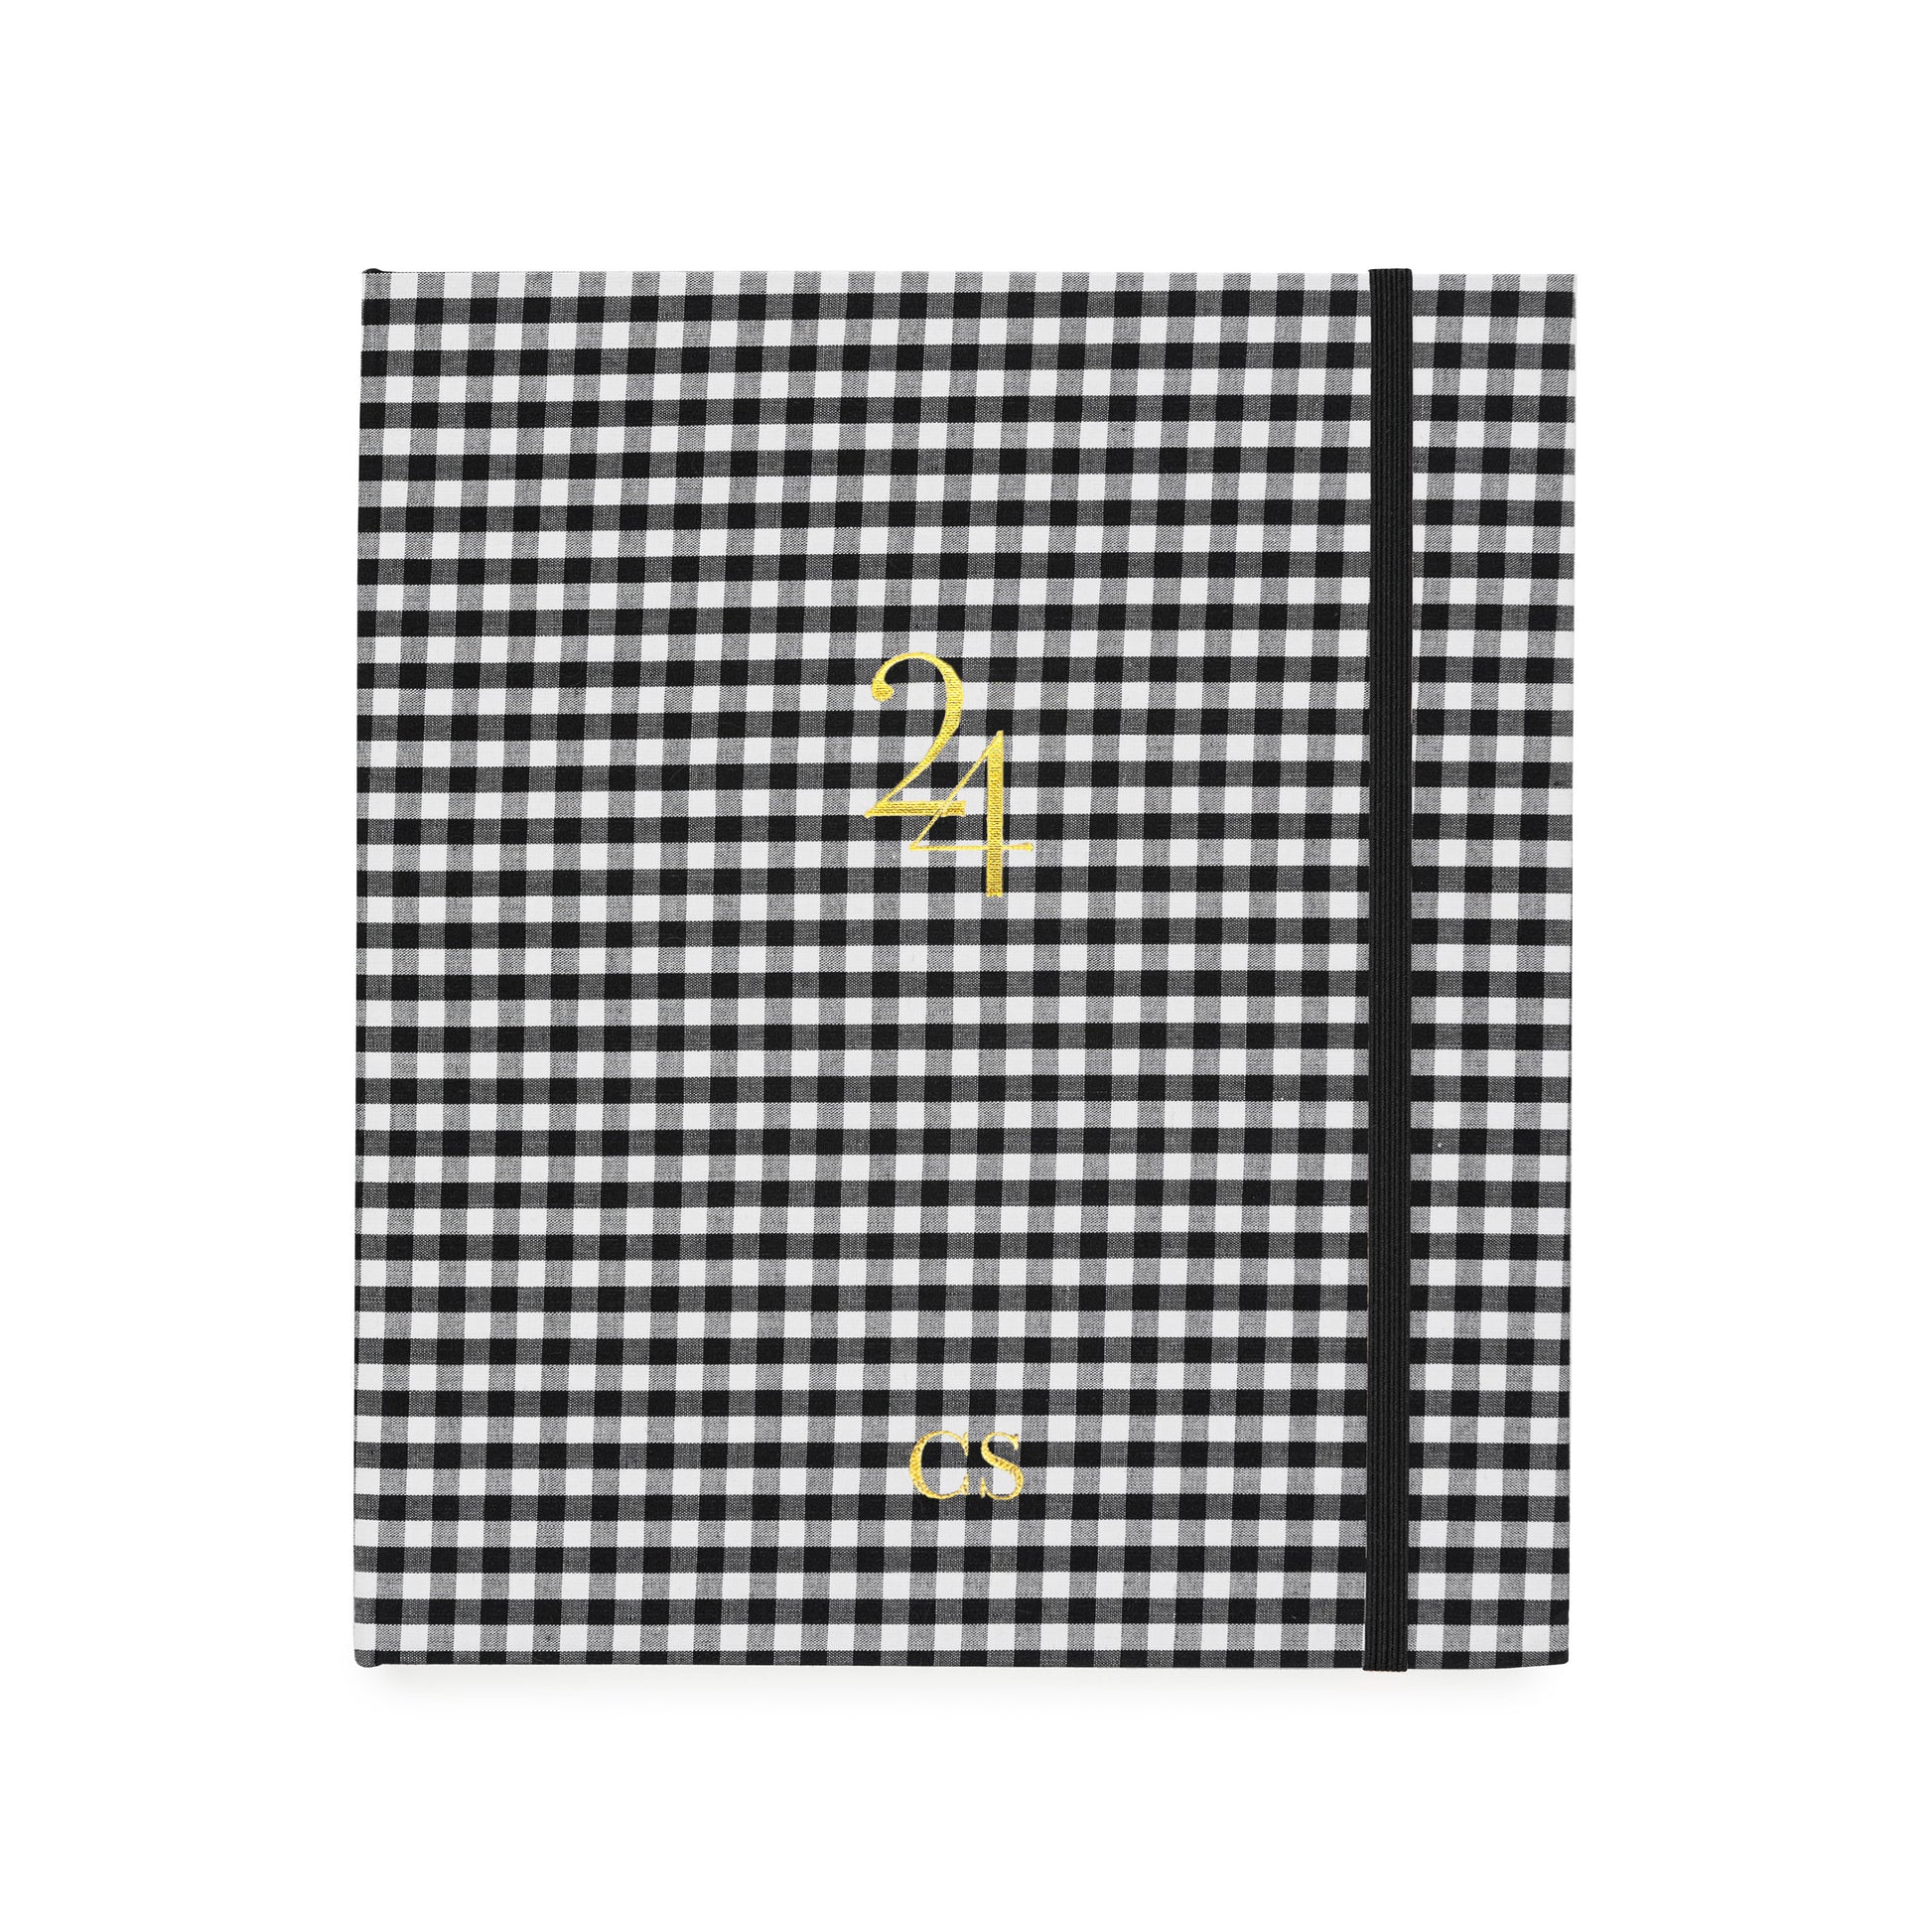 2024 Gingham concealed planner foil stamped with monogram initials